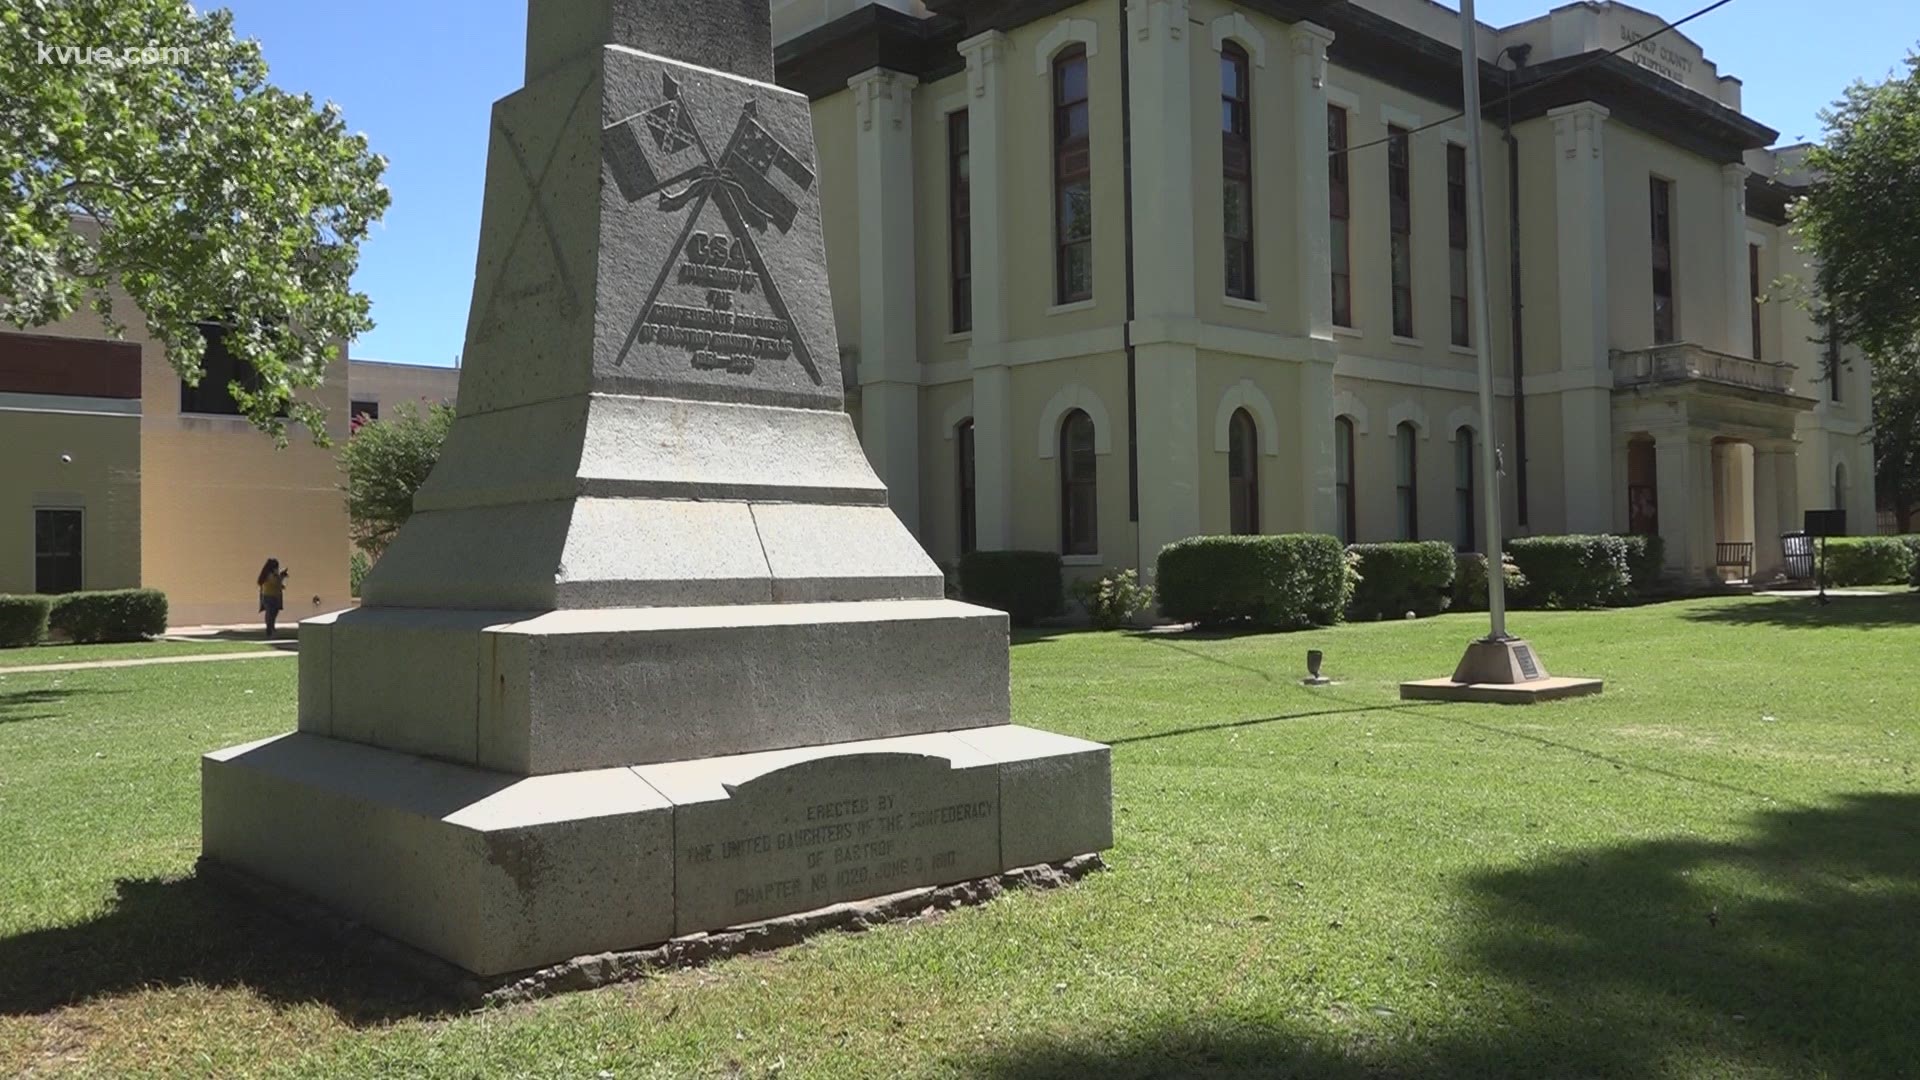 A local author donated $10,000 toward the effort to move the Confederate monuments located outside the Bastrop County Courthouse.